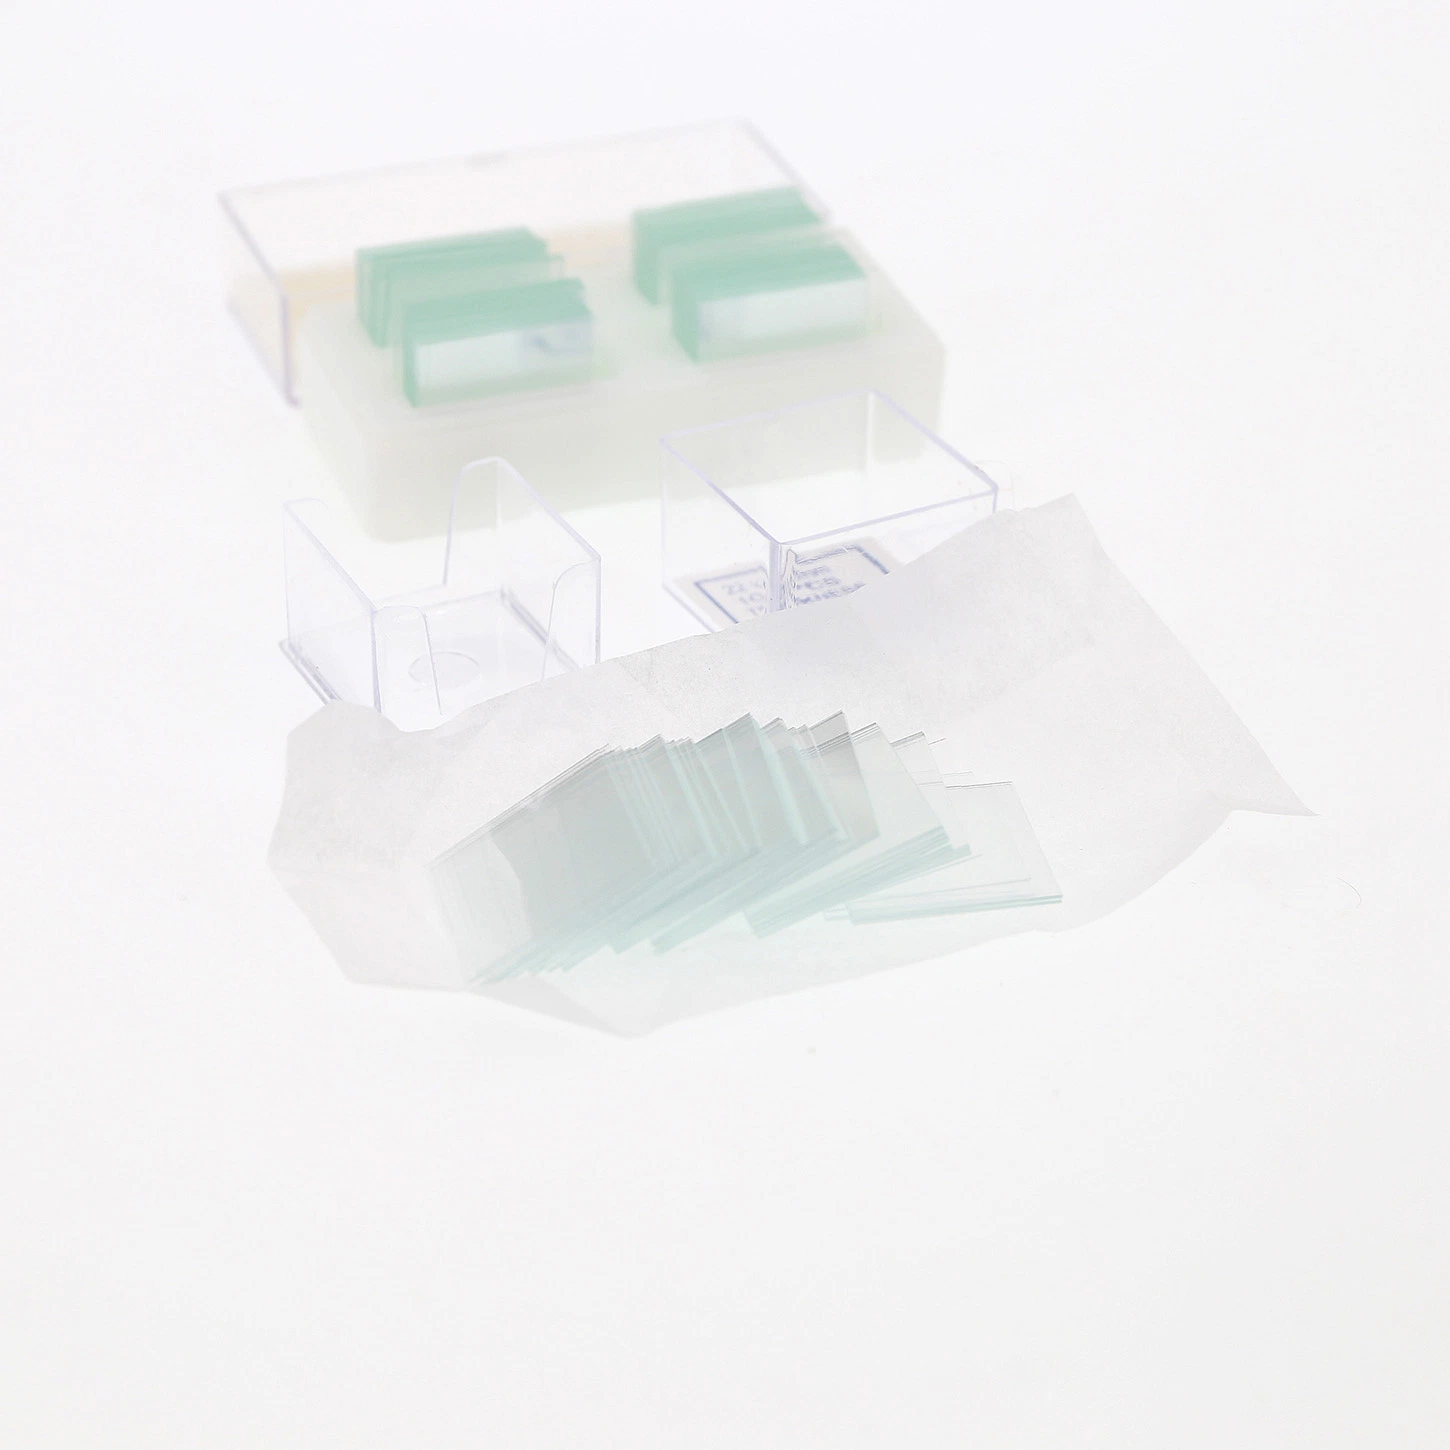 18X18mm/ 20X20mm/ 22X22mm/ 24X24mm Laboratory Disposable 7201 Microscope Cover Glass with CE/ISO